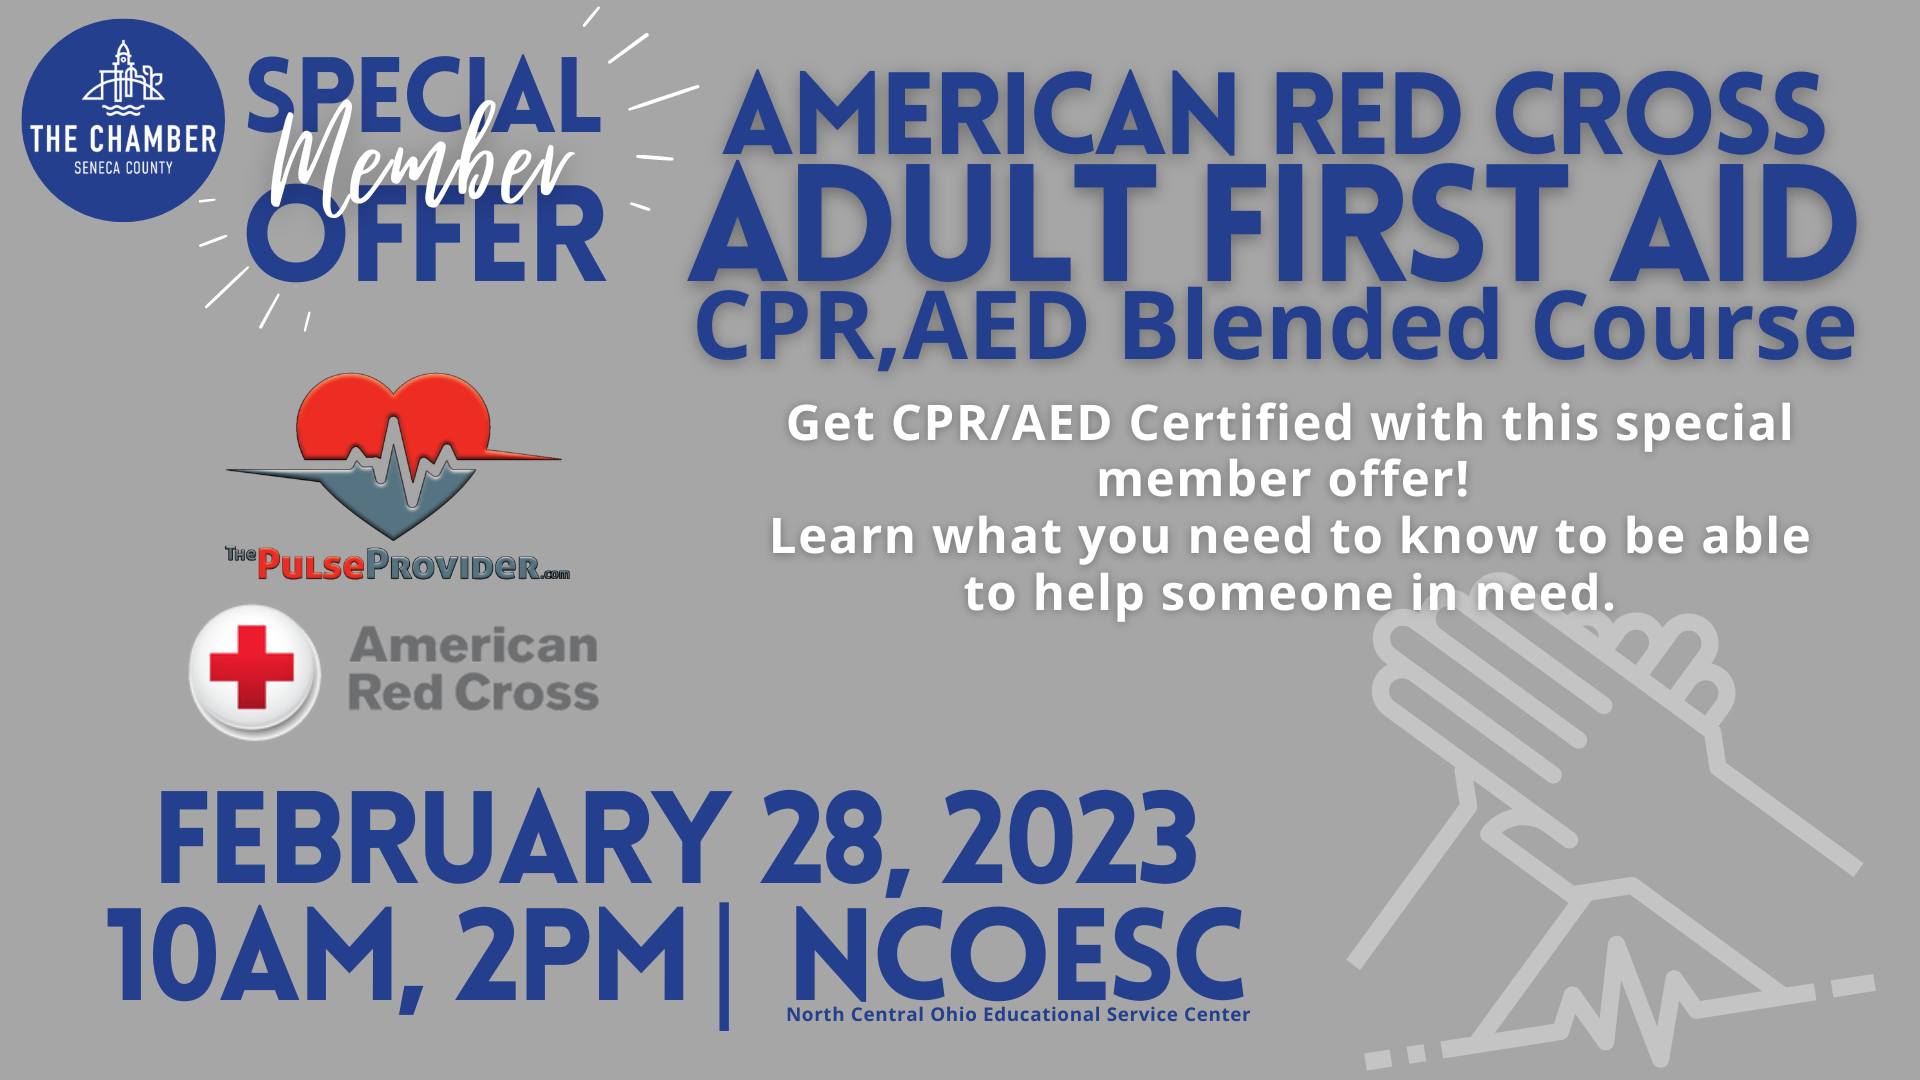 Seneca Regional Chamber | Adult First Aid, CPR, AED Blended Course